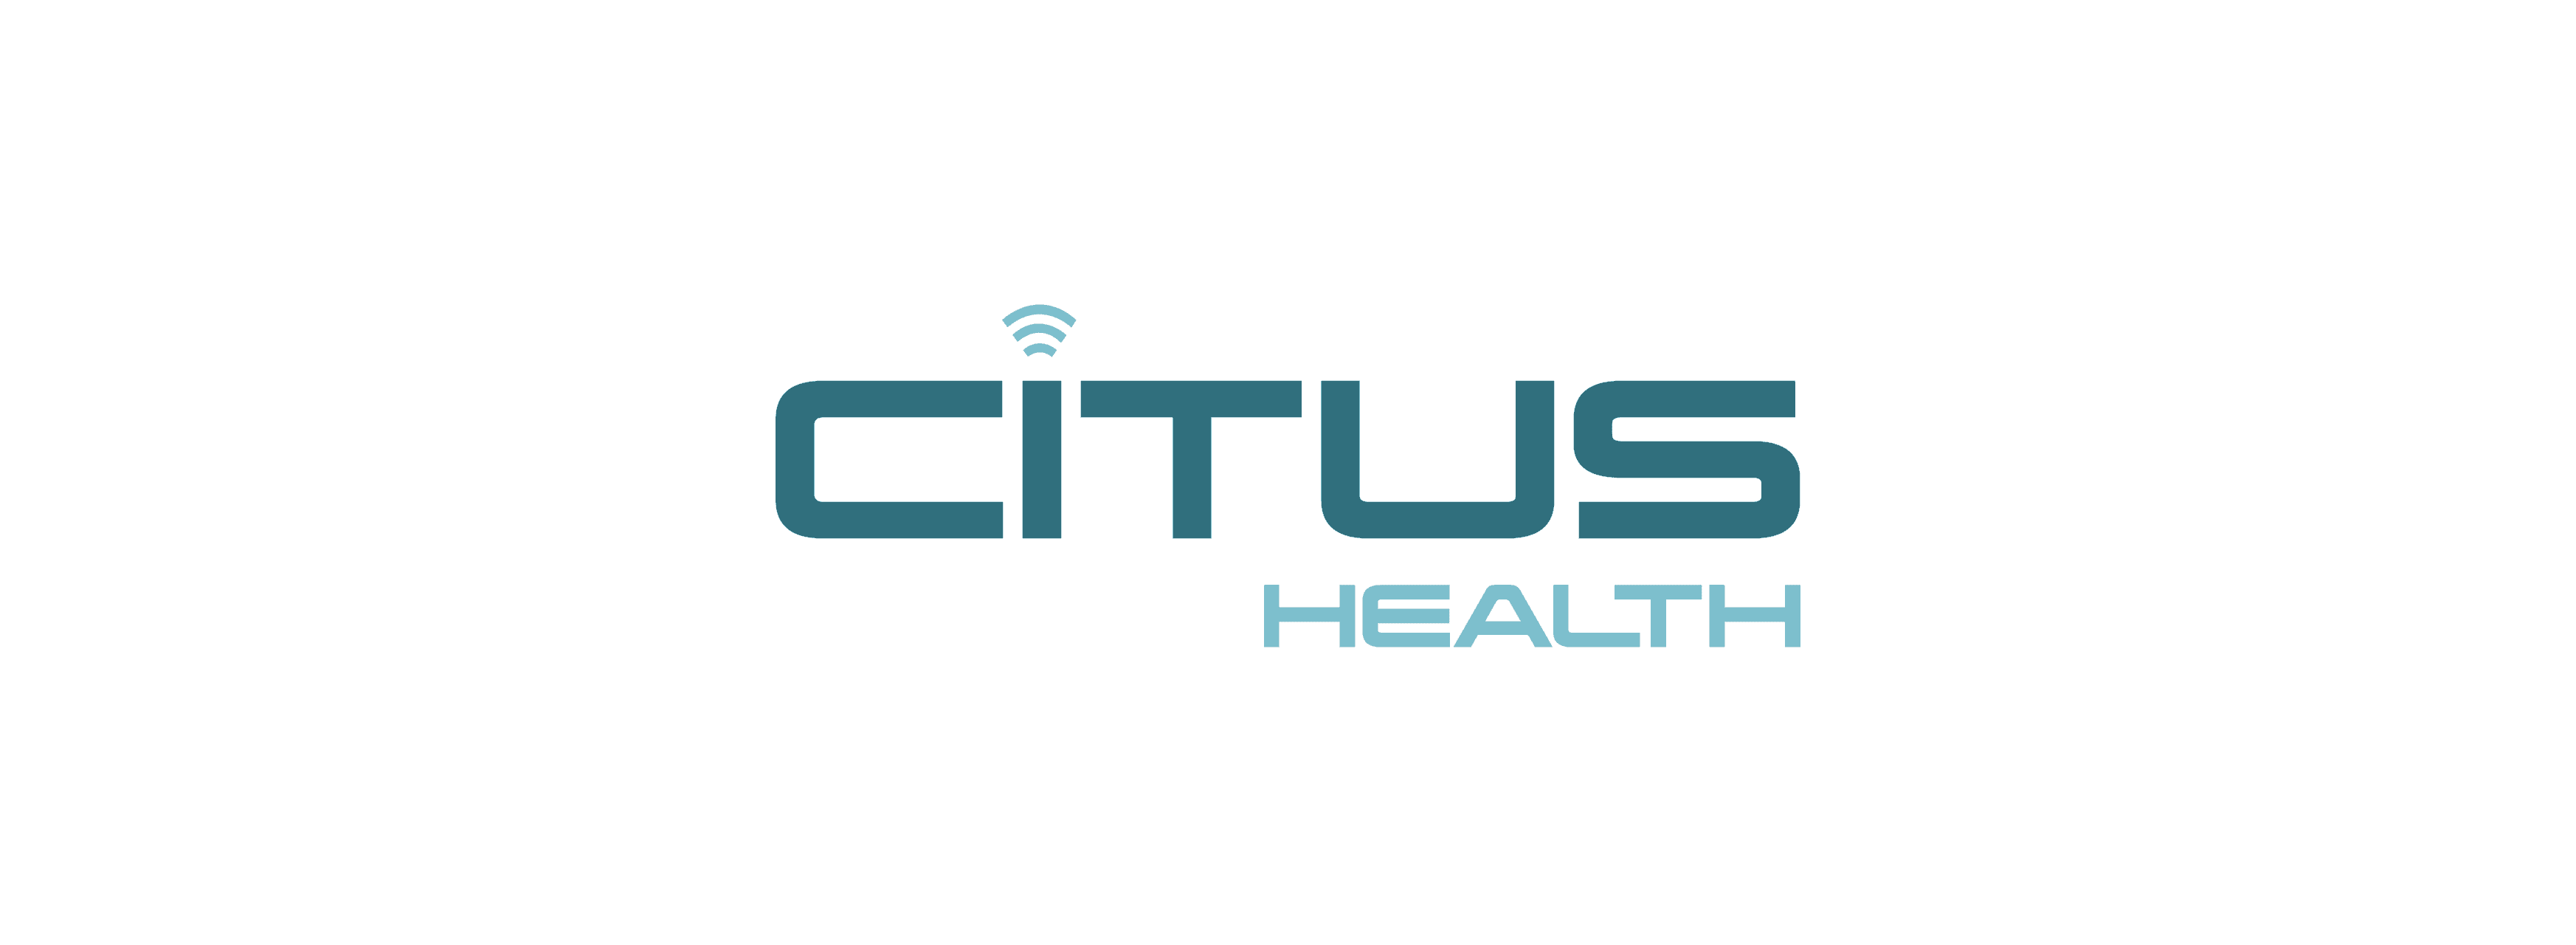 AZZLY® Partners With Citus Health® To Improve Patient Engagement With Digital Forms Solutions